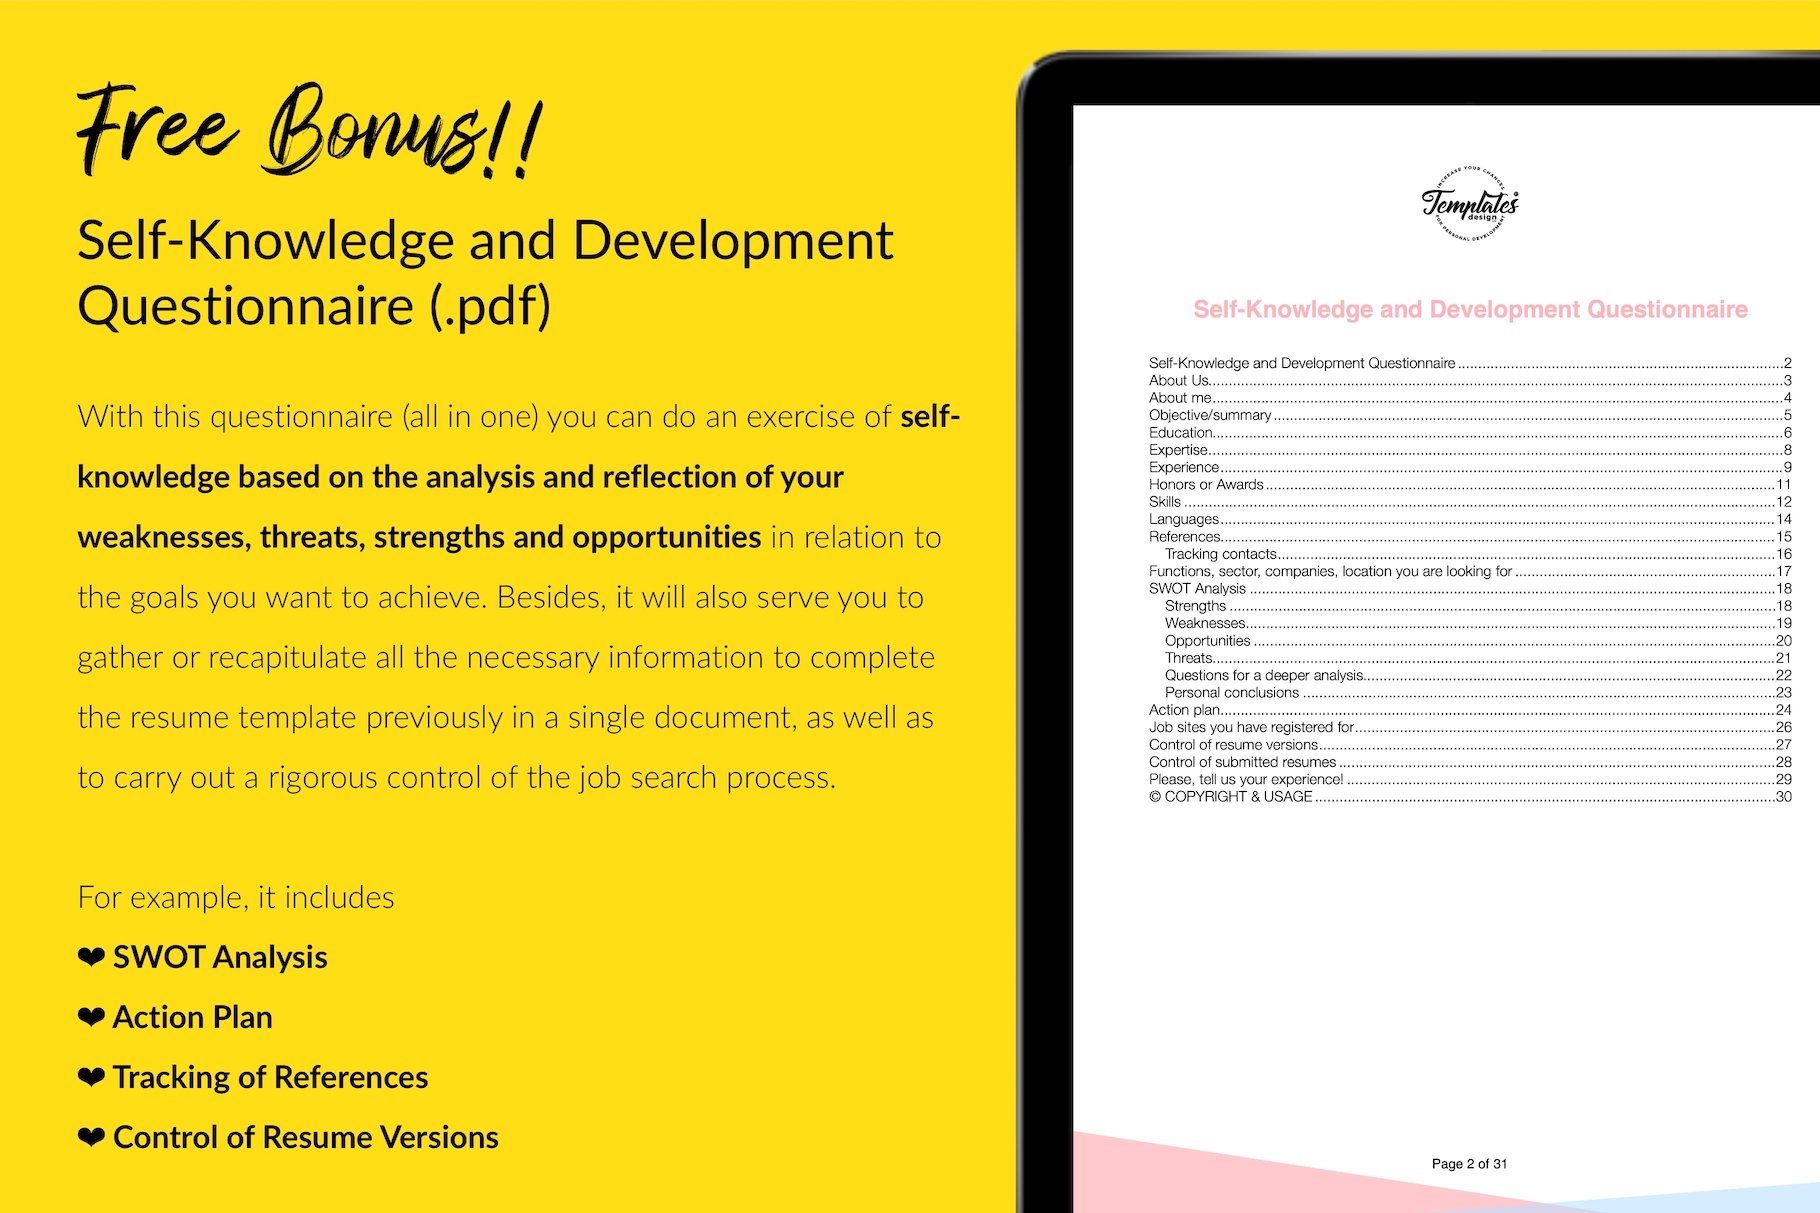 resume cv template cora bailey for creative market 12 self knowledge and development questionnaire 831